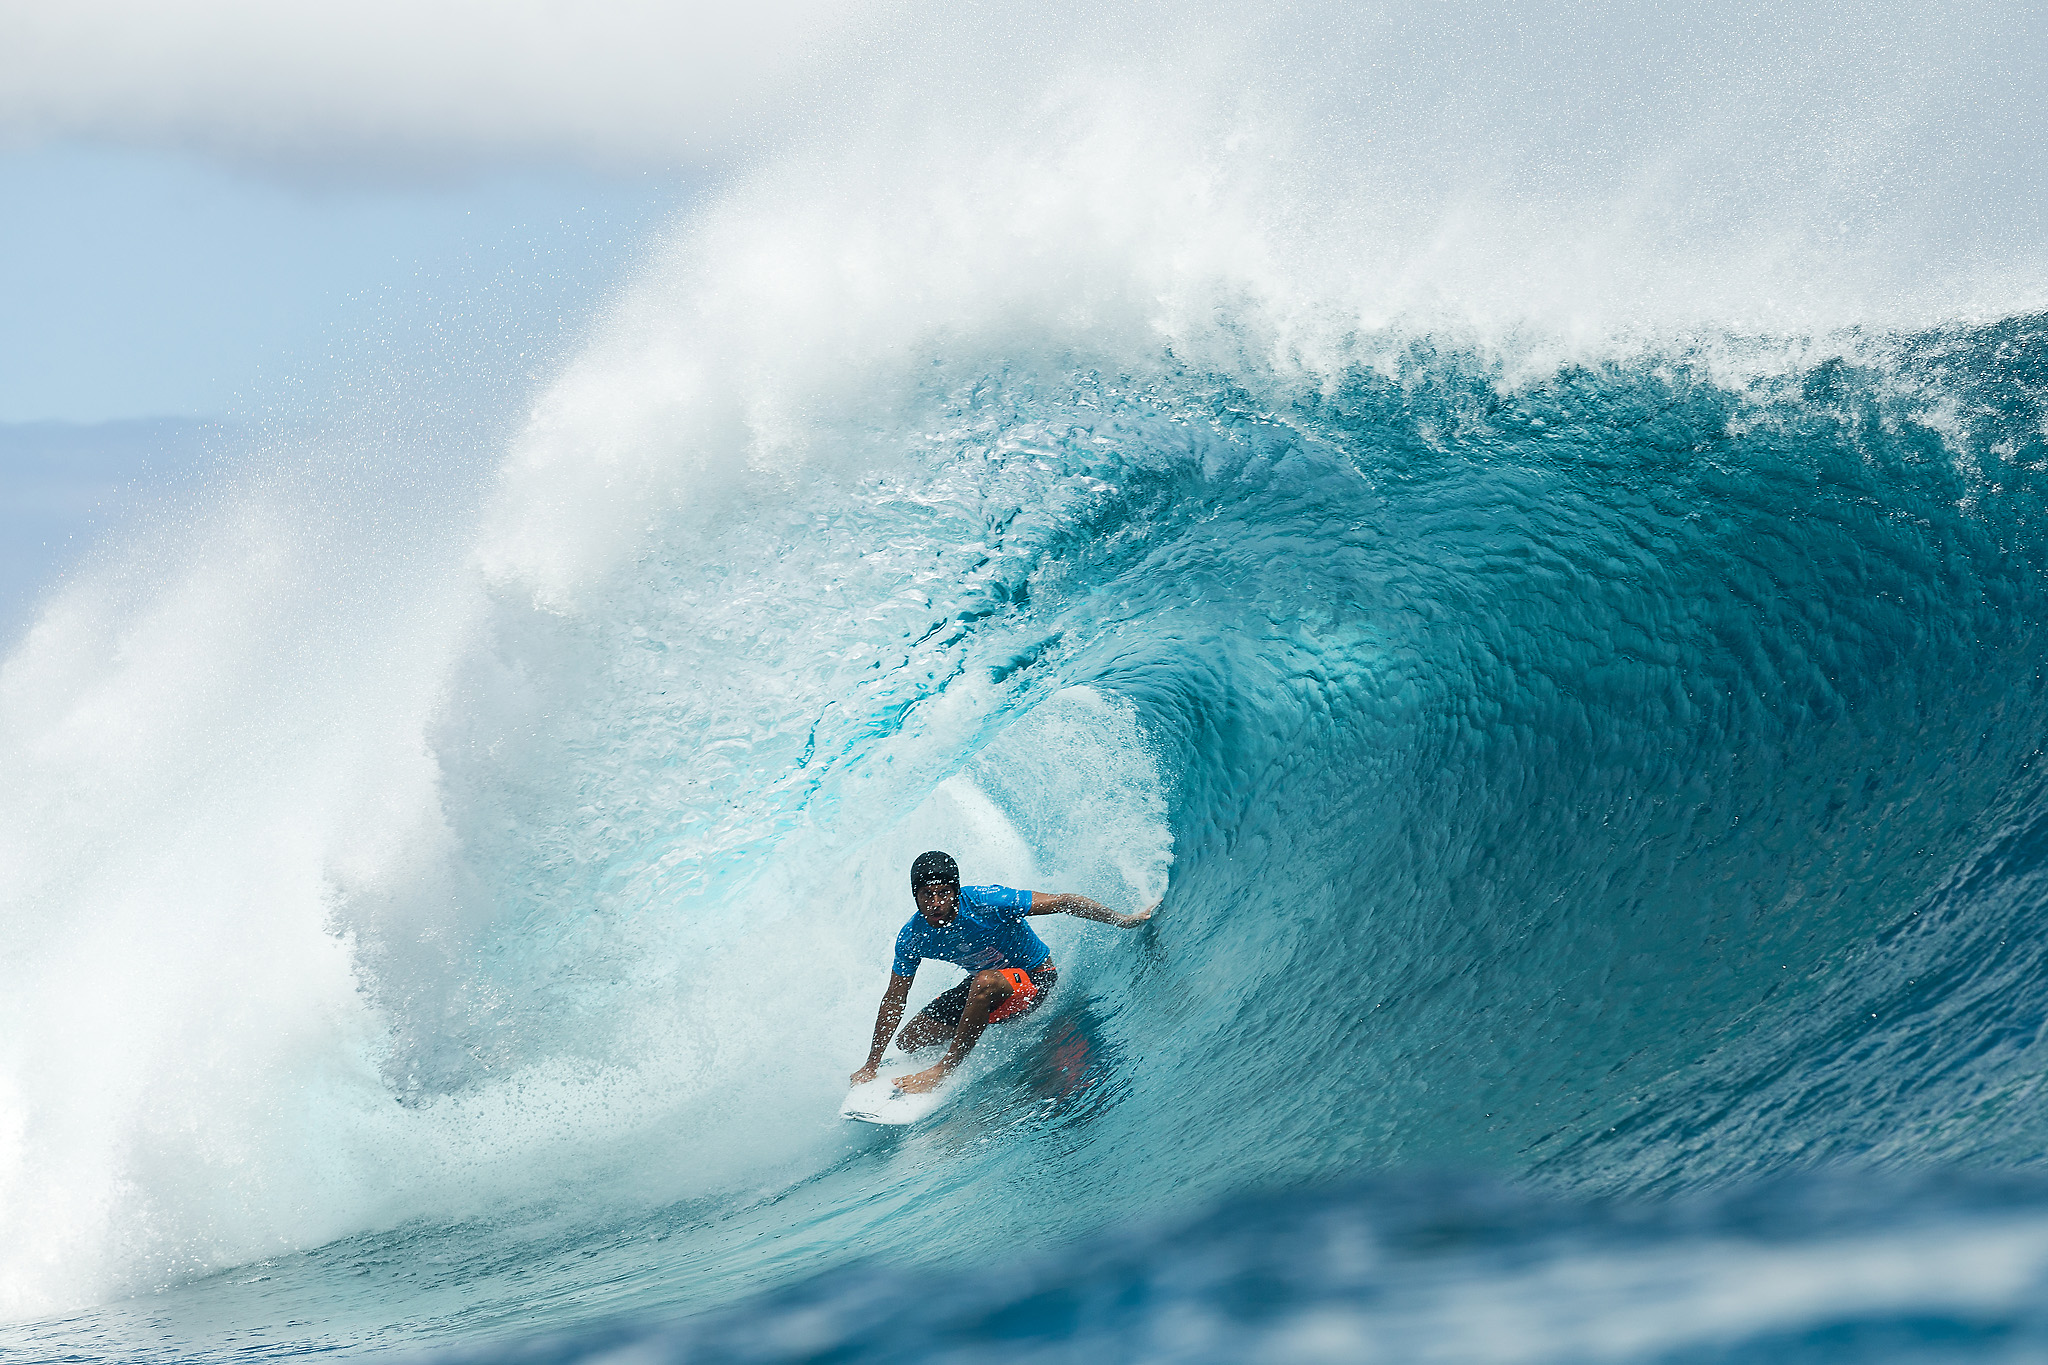 Jeremy Flores of Capbreton, France (pictured) won the Billabong Pro Tahiti by defeating reigning WSL World Champion and defending event winner Gabriel Medina (BRA) in the final at Teahupoo on 25 August 2015. IMAGE CREDIT: WSL / Cestari PHOTOGRAPHER: Kelly Cestari SOCIAL MEDIA TAG: @wsl @kc80 The images attached or accessed by link within this email ("Images") are hand-out images from the Association of Surfing Professionals LLC ("World Surf League"). All Images are royalty-free but for editorial use only. No commercial or other rights are granted to the Images in any way. The Images are provided on an "as is" basis and no warranty is provided for use of a particular purpose. Rights to an individual within an Image are not provided. Copyright to the Images is owned by World Surf League. Sale or license of the Images is prohibited. ALL RIGHTS RESERVED.